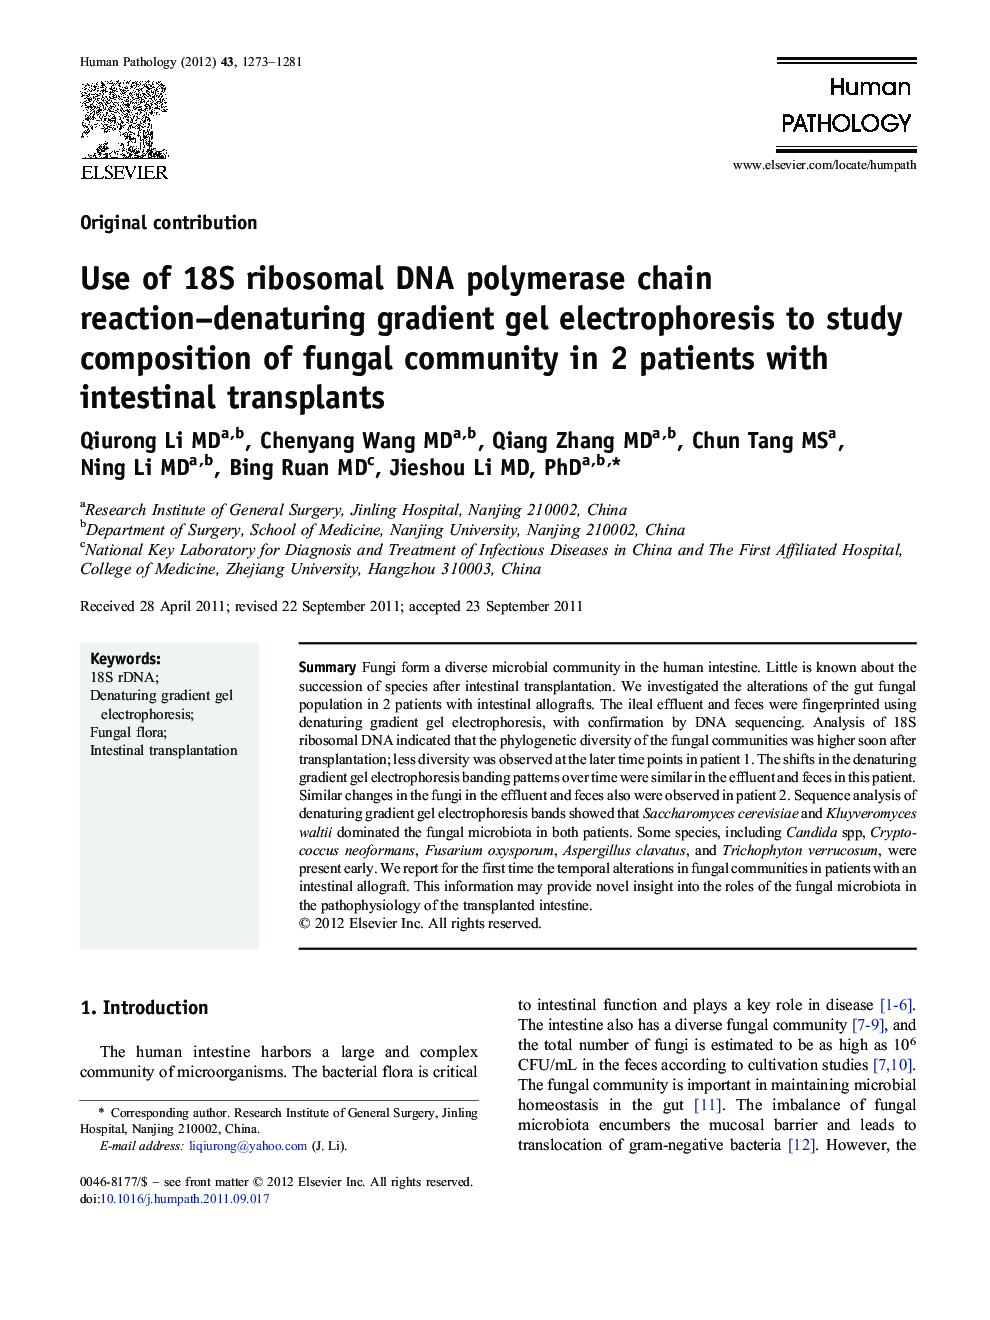 Use of 18S ribosomal DNA polymerase chain reaction–denaturing gradient gel electrophoresis to study composition of fungal community in 2 patients with intestinal transplants